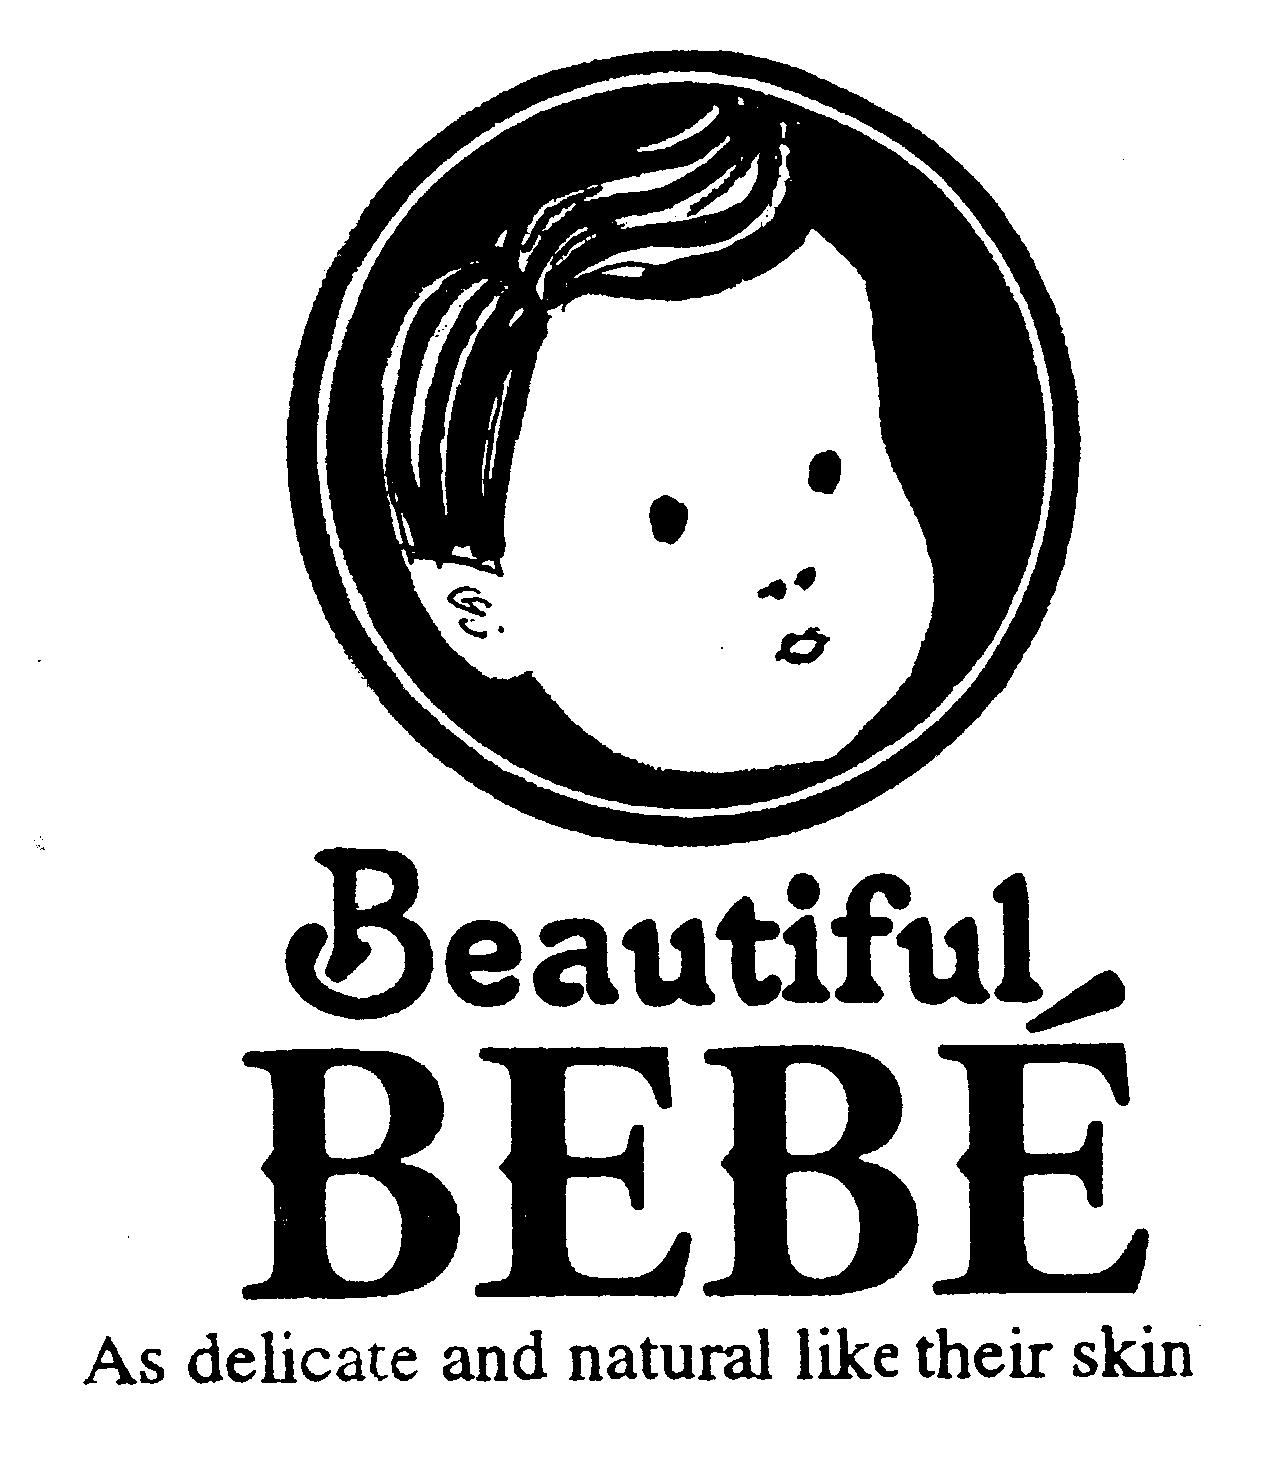  BEAUTIFUL BEBE AS DELICATE AND NATURAL LIKE THEIR SKIN